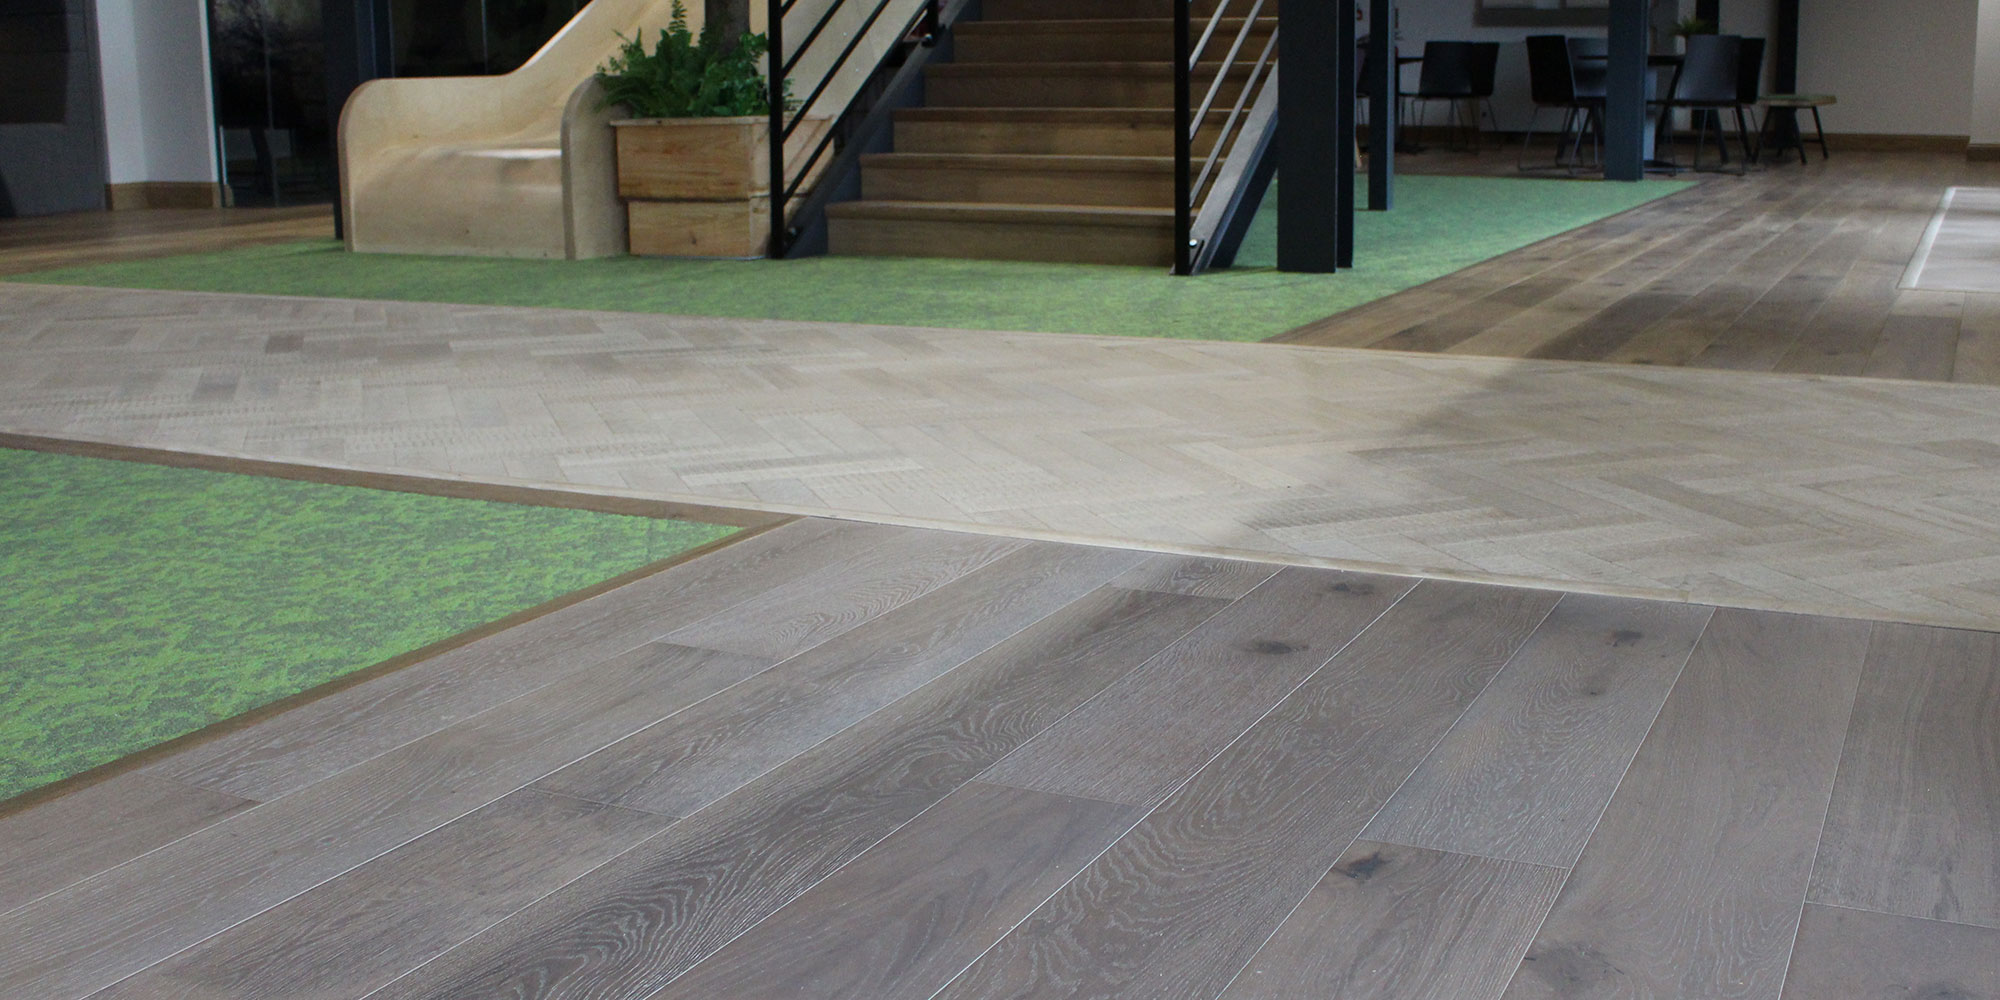 Using Wood to Define Spaces Woodpecker Flooring Professional